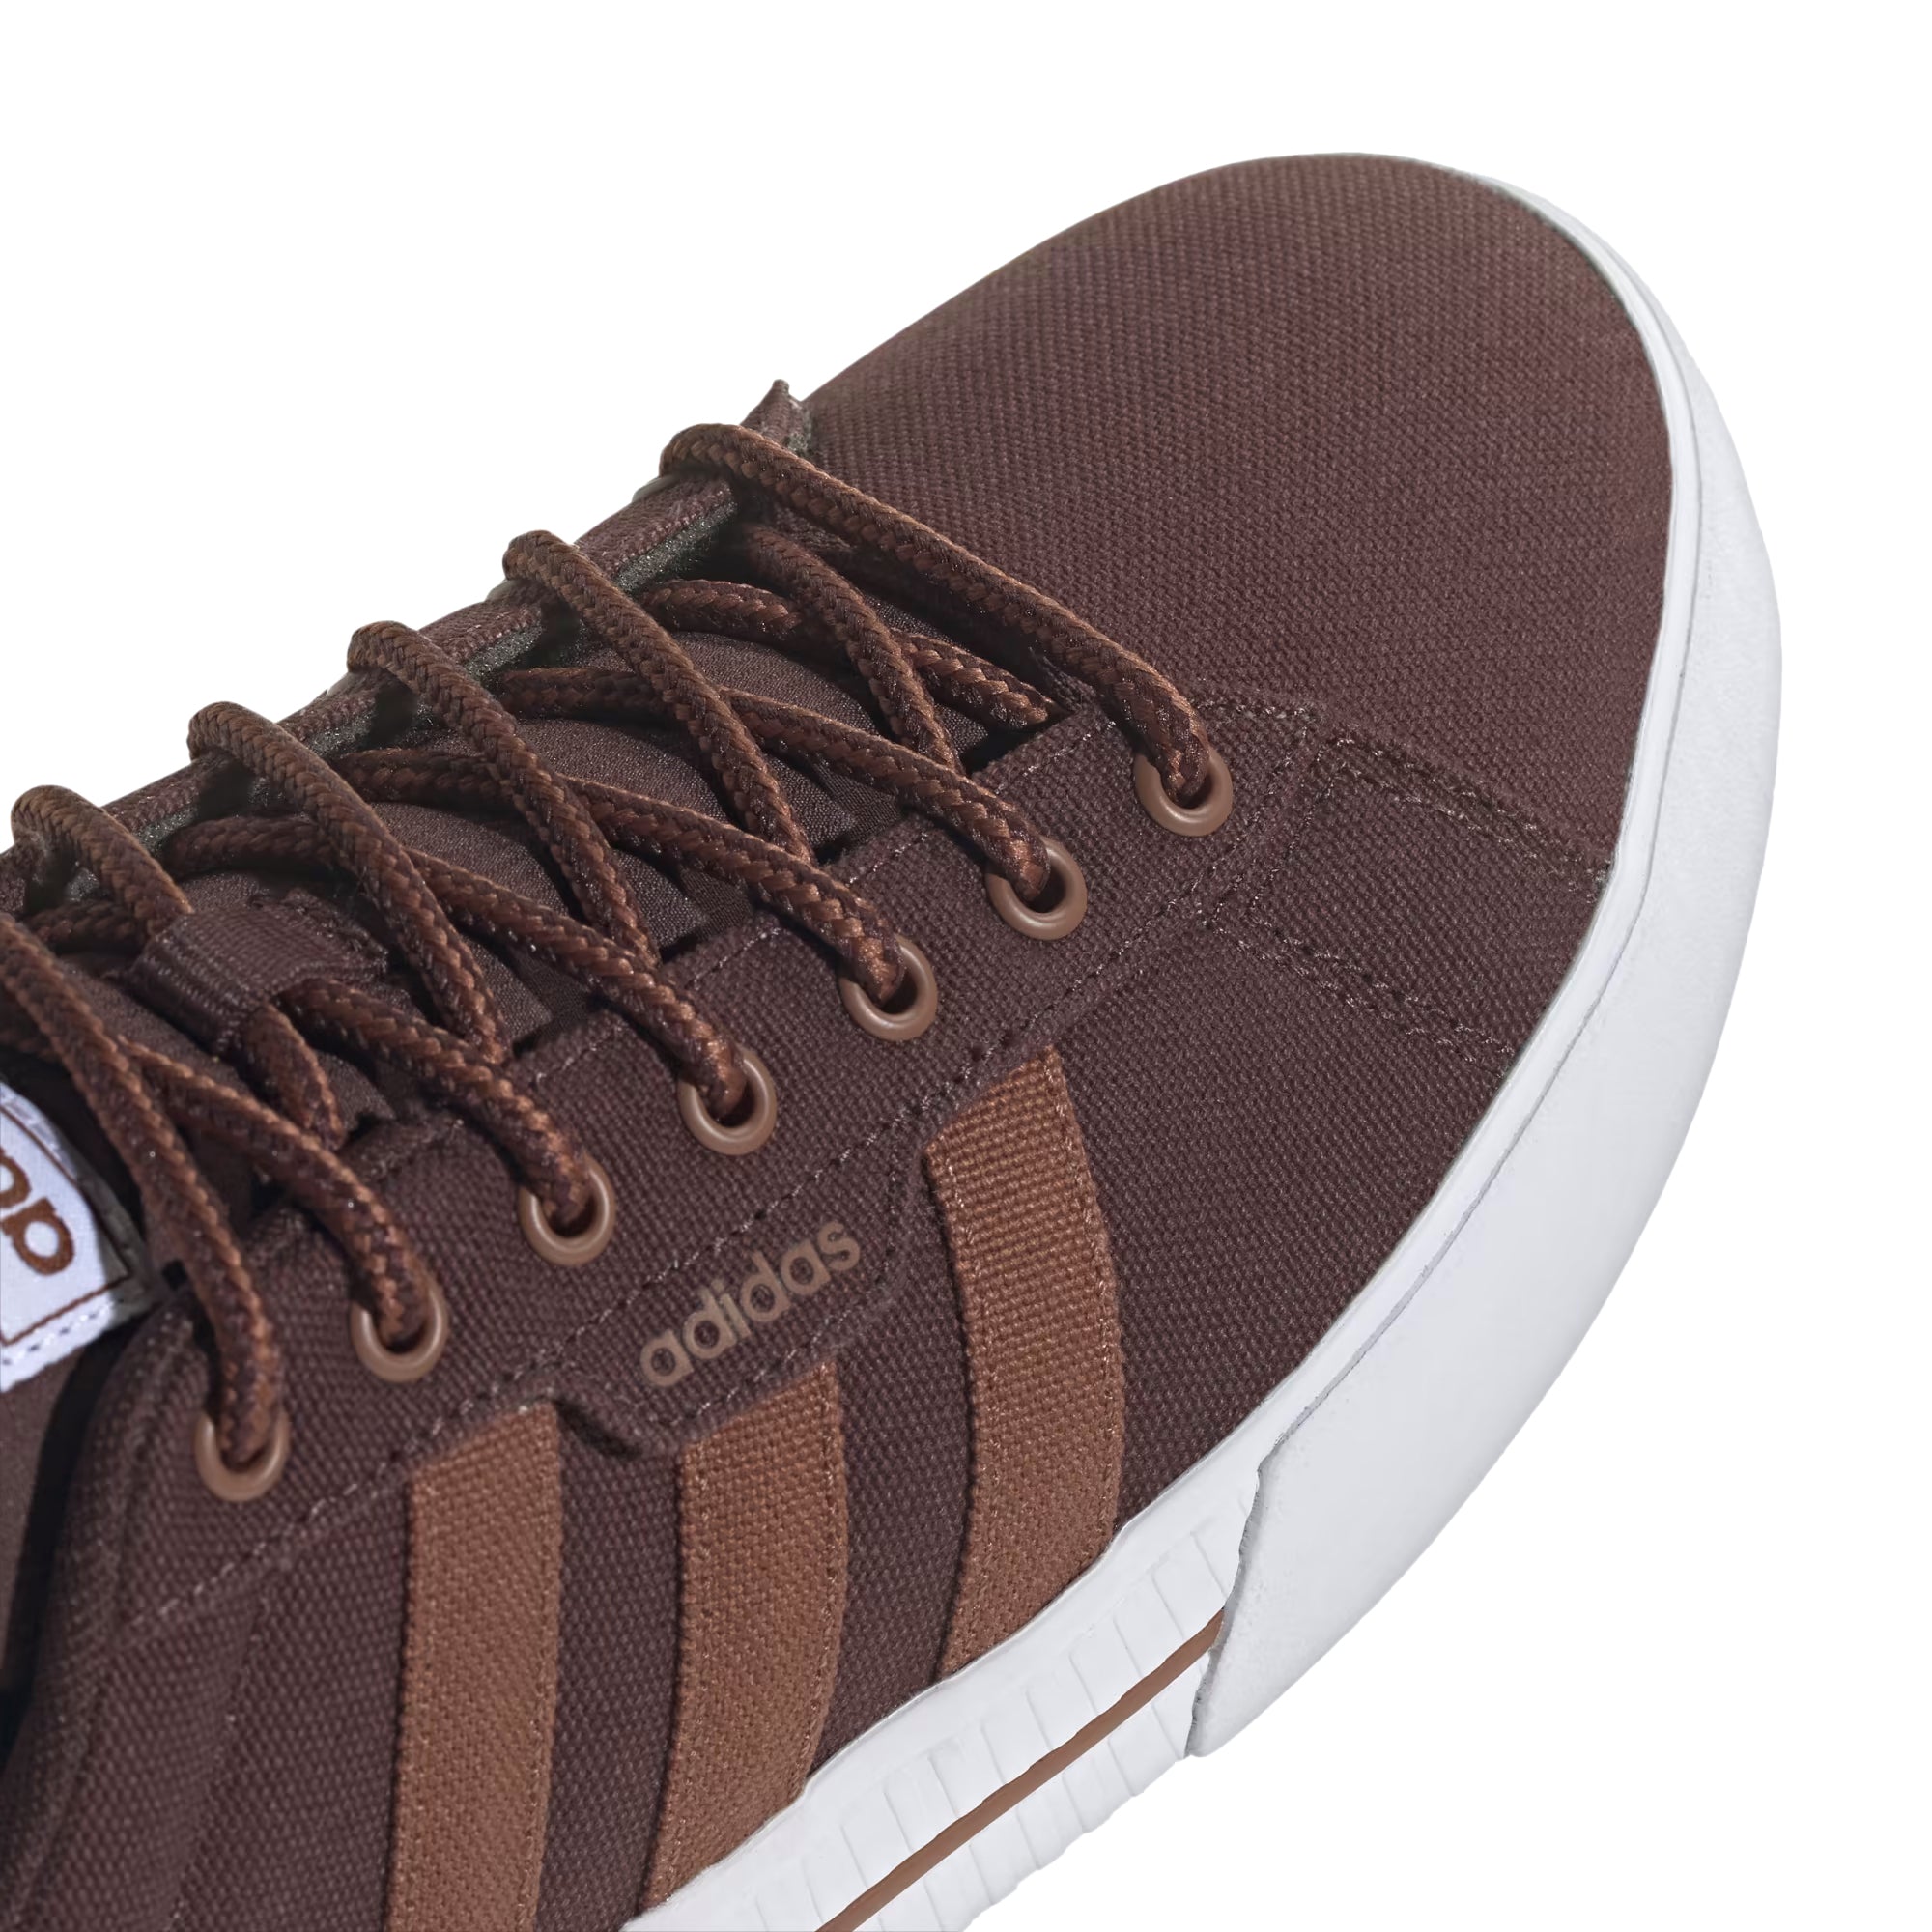 Brown canvas Adidas sneaker with lighter brown stripes and a white sole.